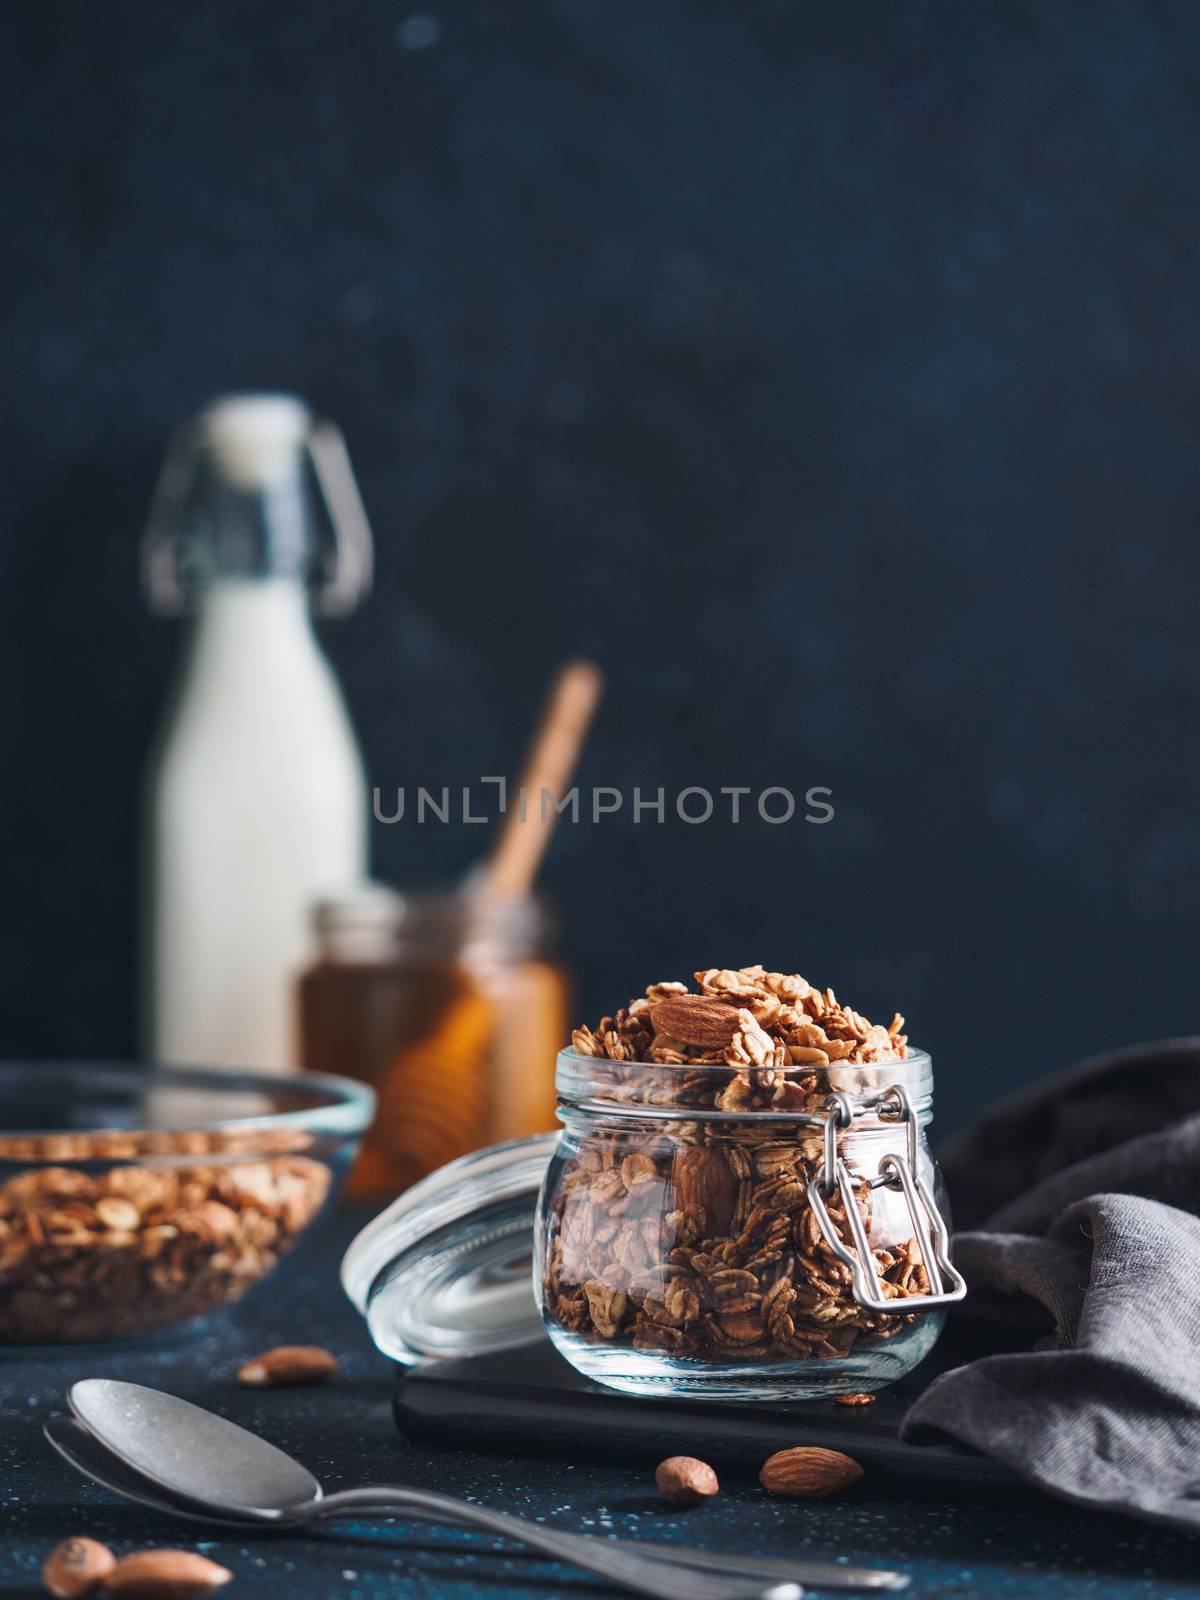 Homemade granola in glass jar on dark table. Ingredients for healthy breakfast - granola, milk and honey. Copy space for text. Low key.